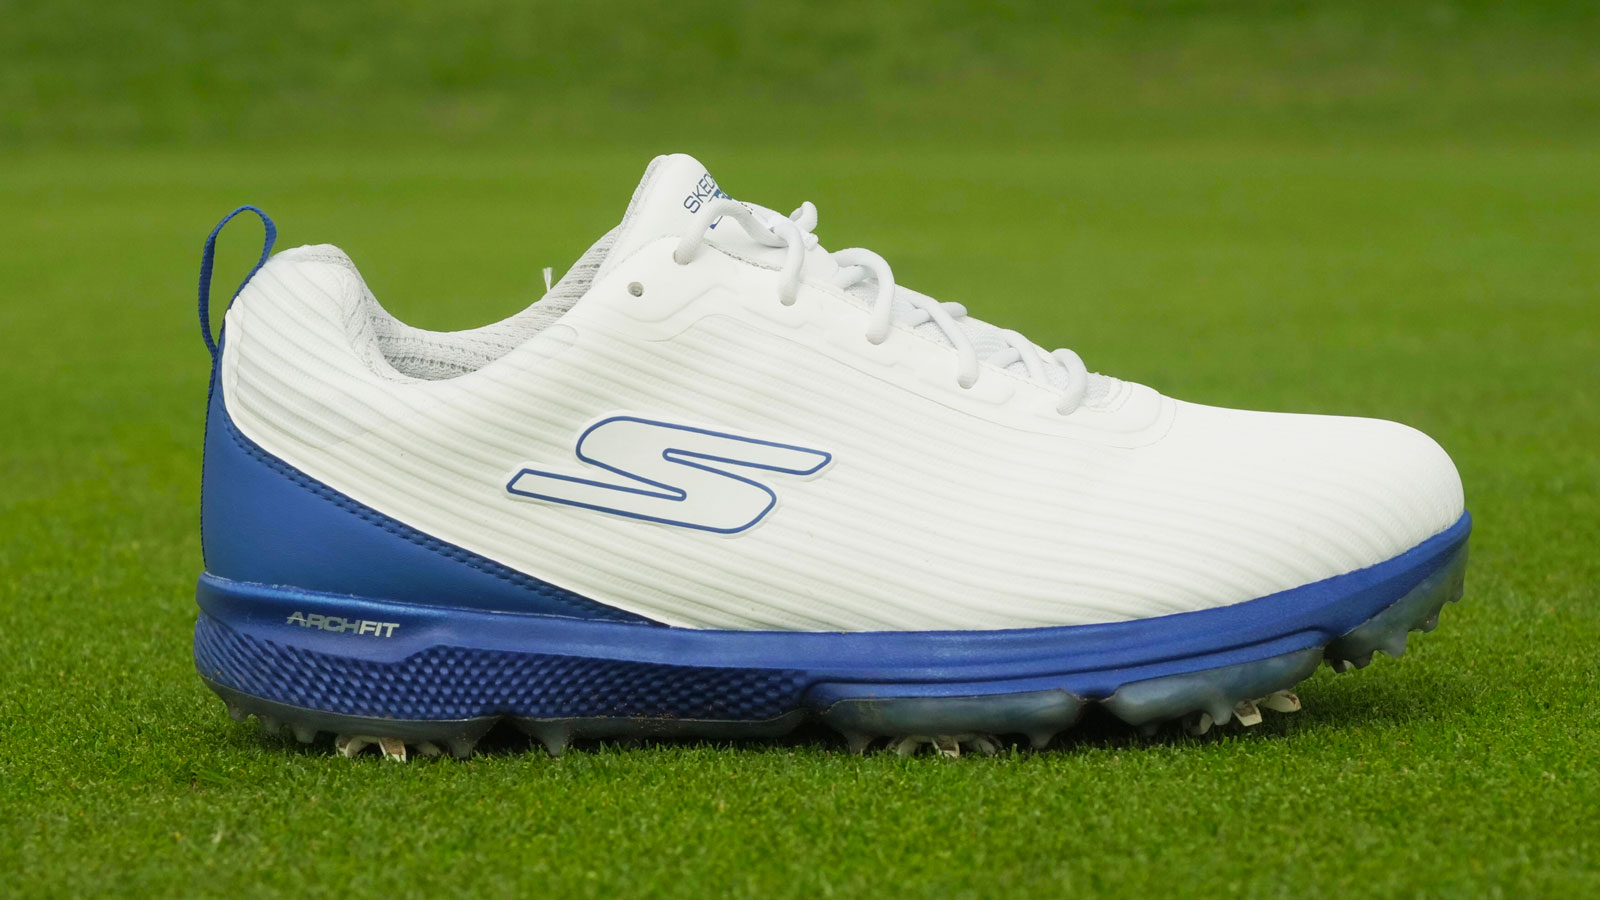 Skechers Pro 5 Hyper Golf Shoe Review | Golf Monthly